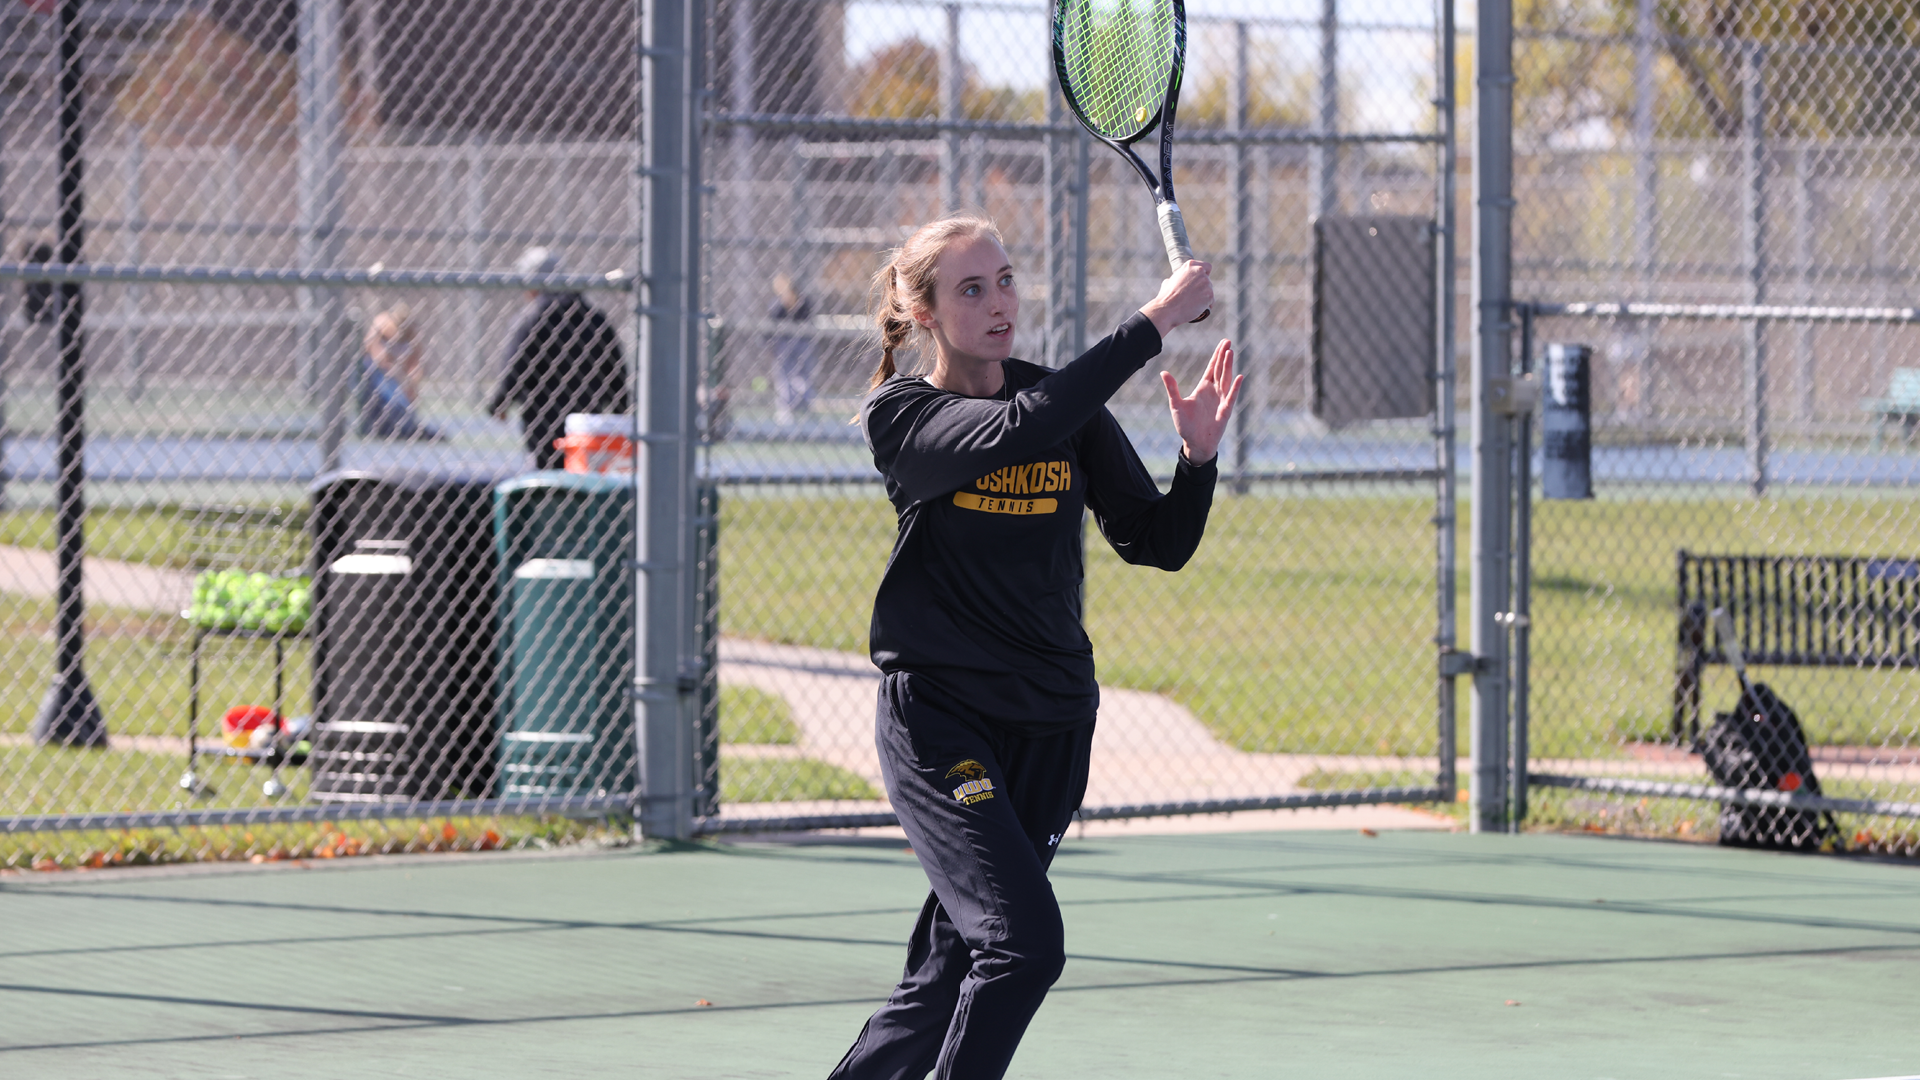 Olivia Pethan picked up wins in both the No. 1 doubles and singles in UW-Oshkosh's sweep on UW-Stout on Sunday